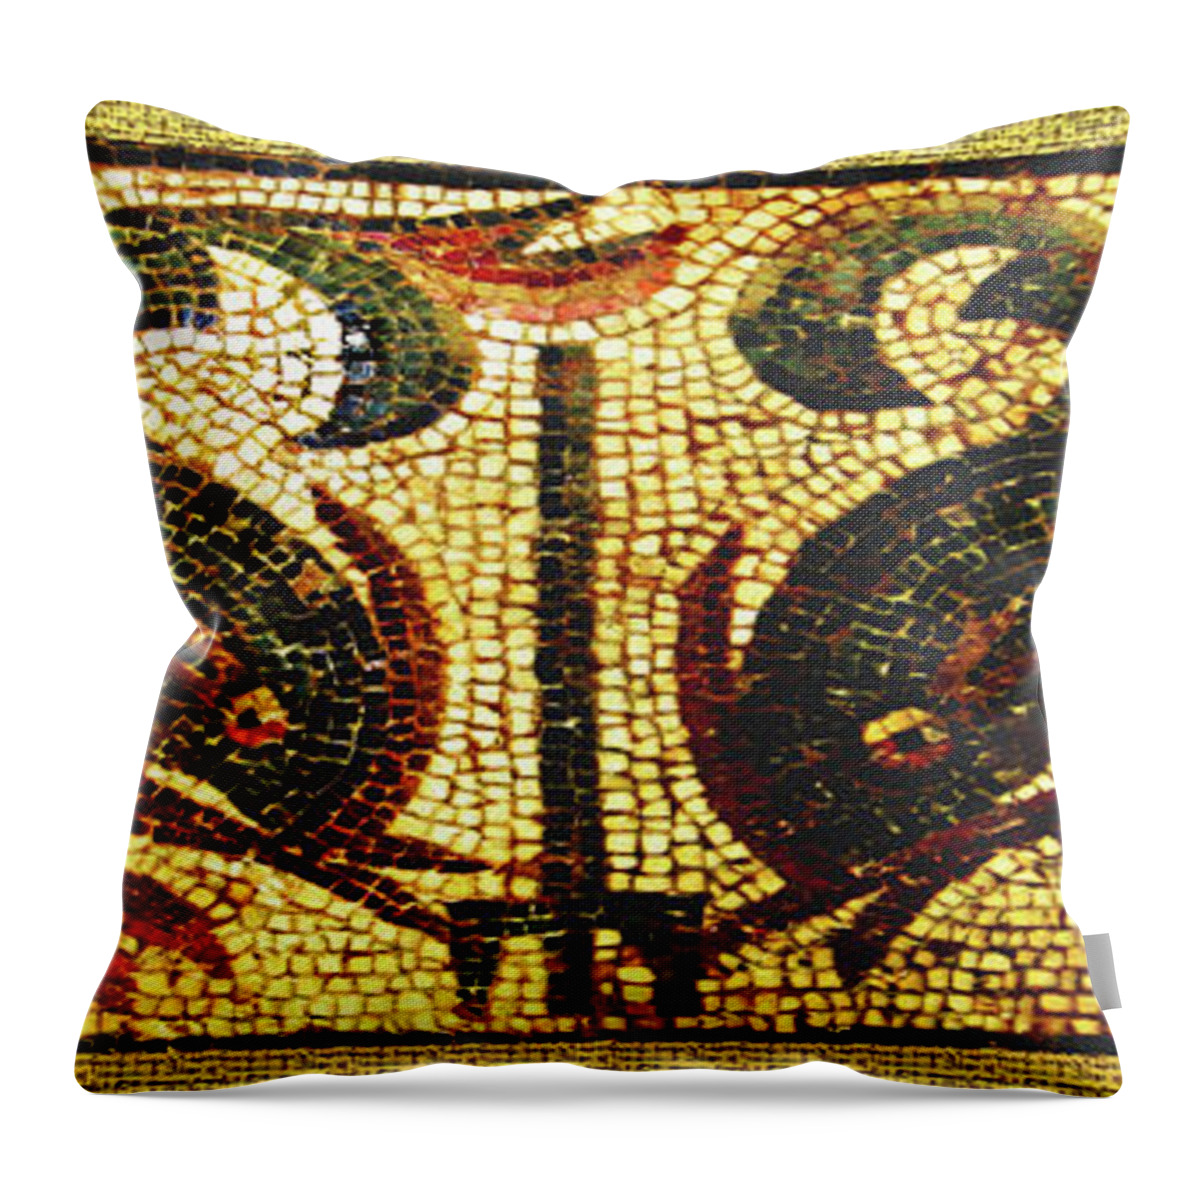 Dolphins Throw Pillow featuring the digital art Dolphins of Pompeii #1 by Asok Mukhopadhyay